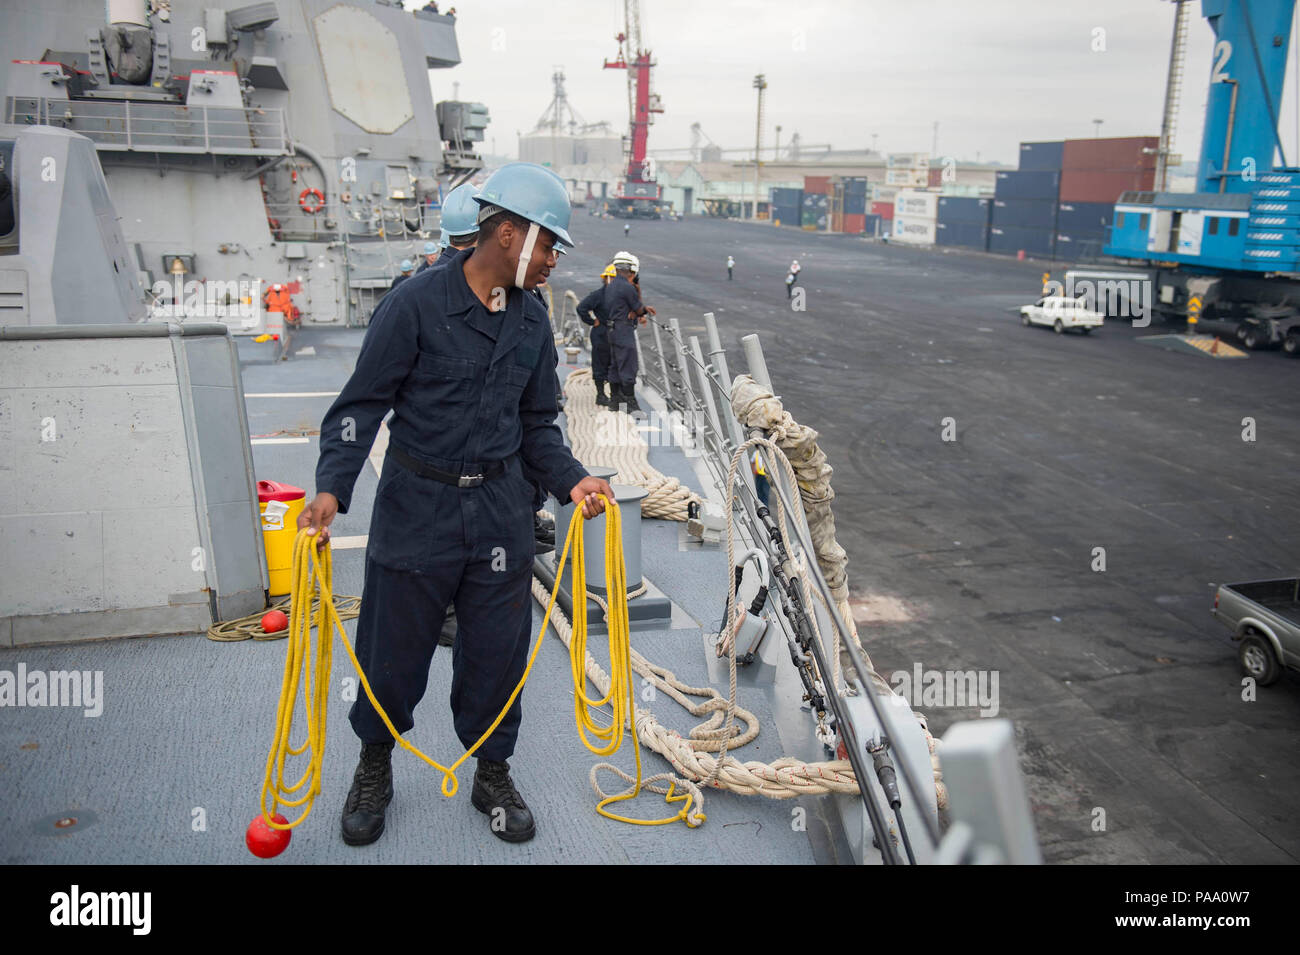 160304-N-MD297-018 PUERTO QUETZAL, Guatemala (March 4, 2016) - Seaman Kiundra Cox, assigned to the Arleigh Burke-class guided-missile destroyer USS Lassen (DDG 82), prepares to throw a mooring line onto the pier as the ship moors for a brief stop for fuel (BSF) in Puerto Quetzal, Guatemala. Lassen is deployed to the U.S. 4th Fleet area of responsibility supporting law enforcement operations as part of Operation Martillo. (U.S. Navy photo by Mass Communication Specialist 2nd Class Huey D. Younger Jr./Released) Stock Photo